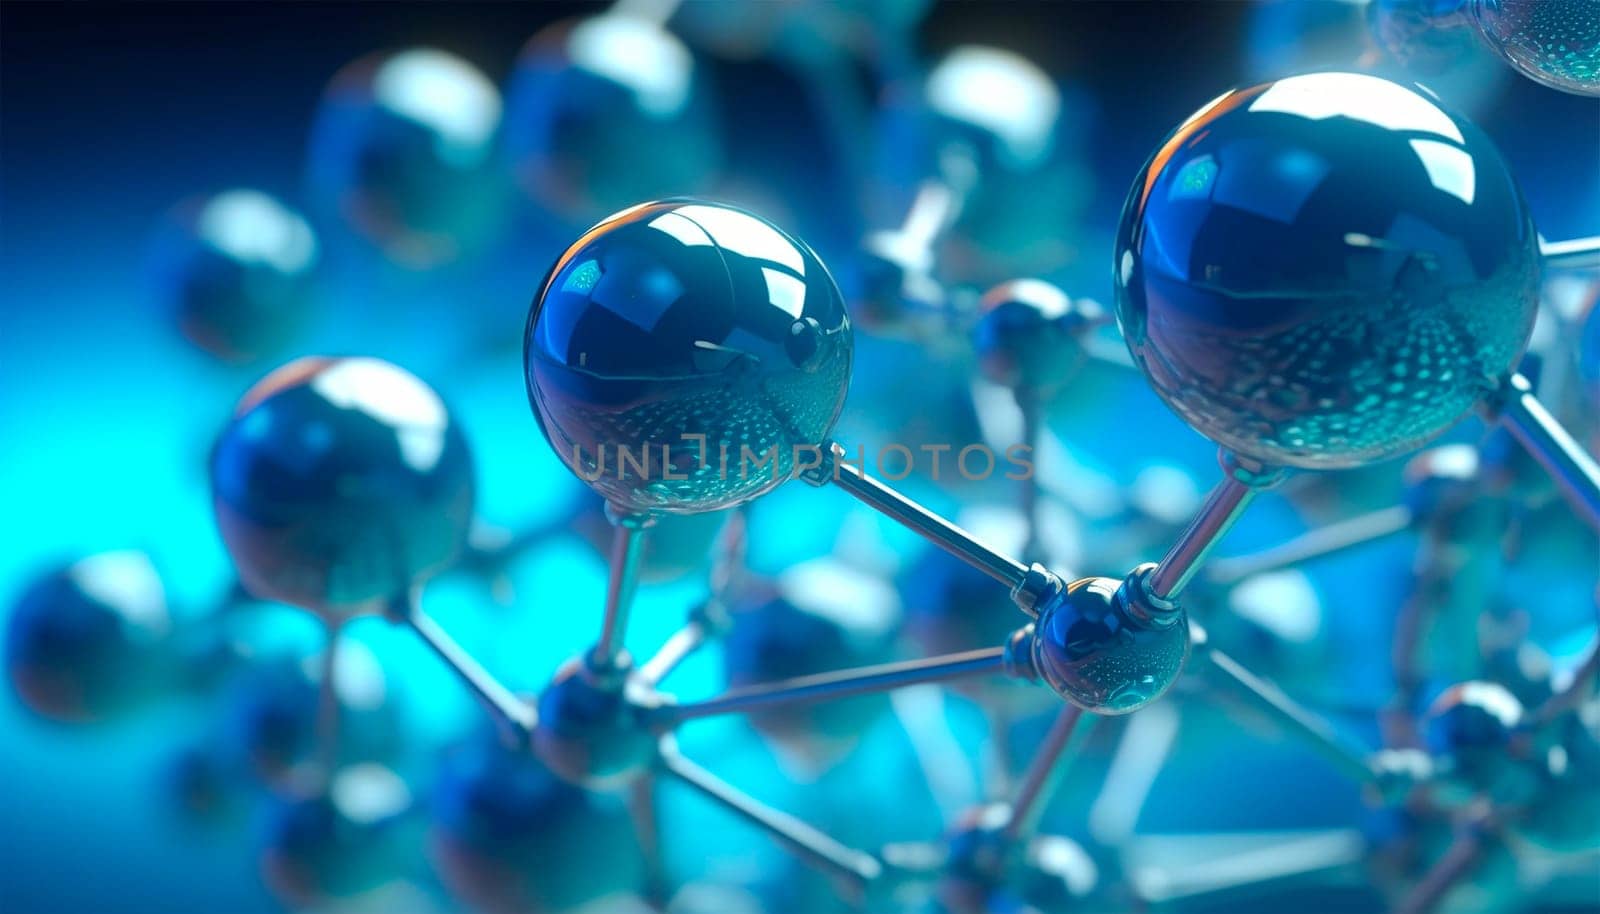 Science background with molecule or atom. molecule set, jojoba nano 3D cell, collagen bio abstract medical icon. Beauty science skin care molecular concept, natural bubble kit. colorful molecule atom illustration by Annebel146